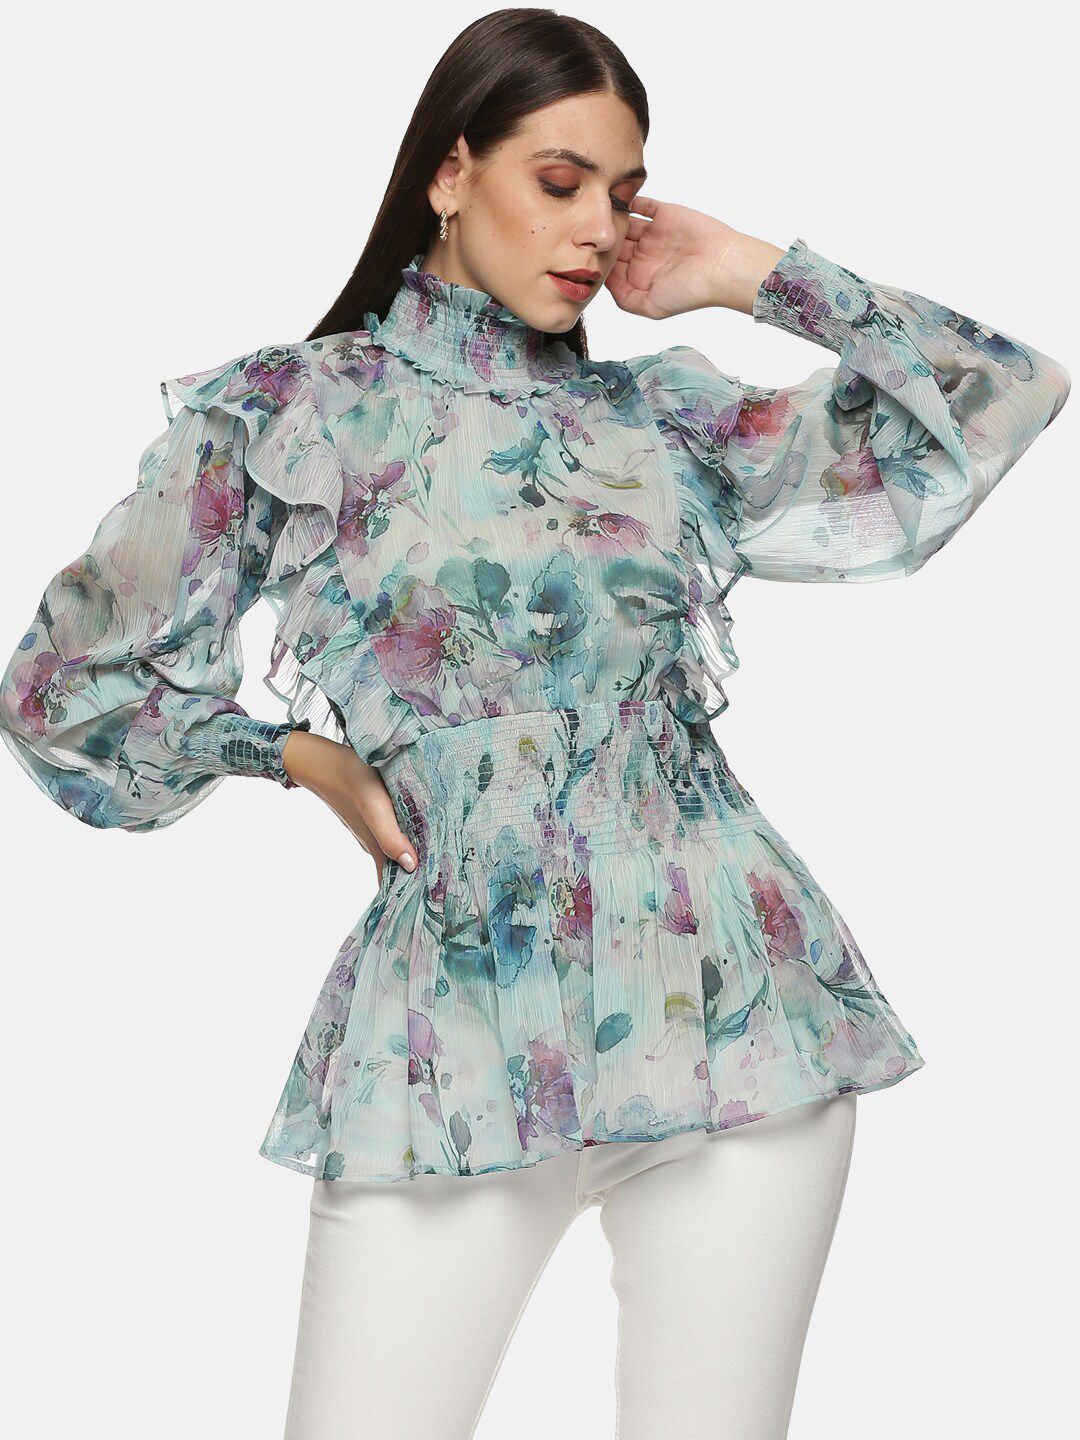 ISU Multicoloured Floral Print High Neck Chiffon Cinched Waist Top Price in India